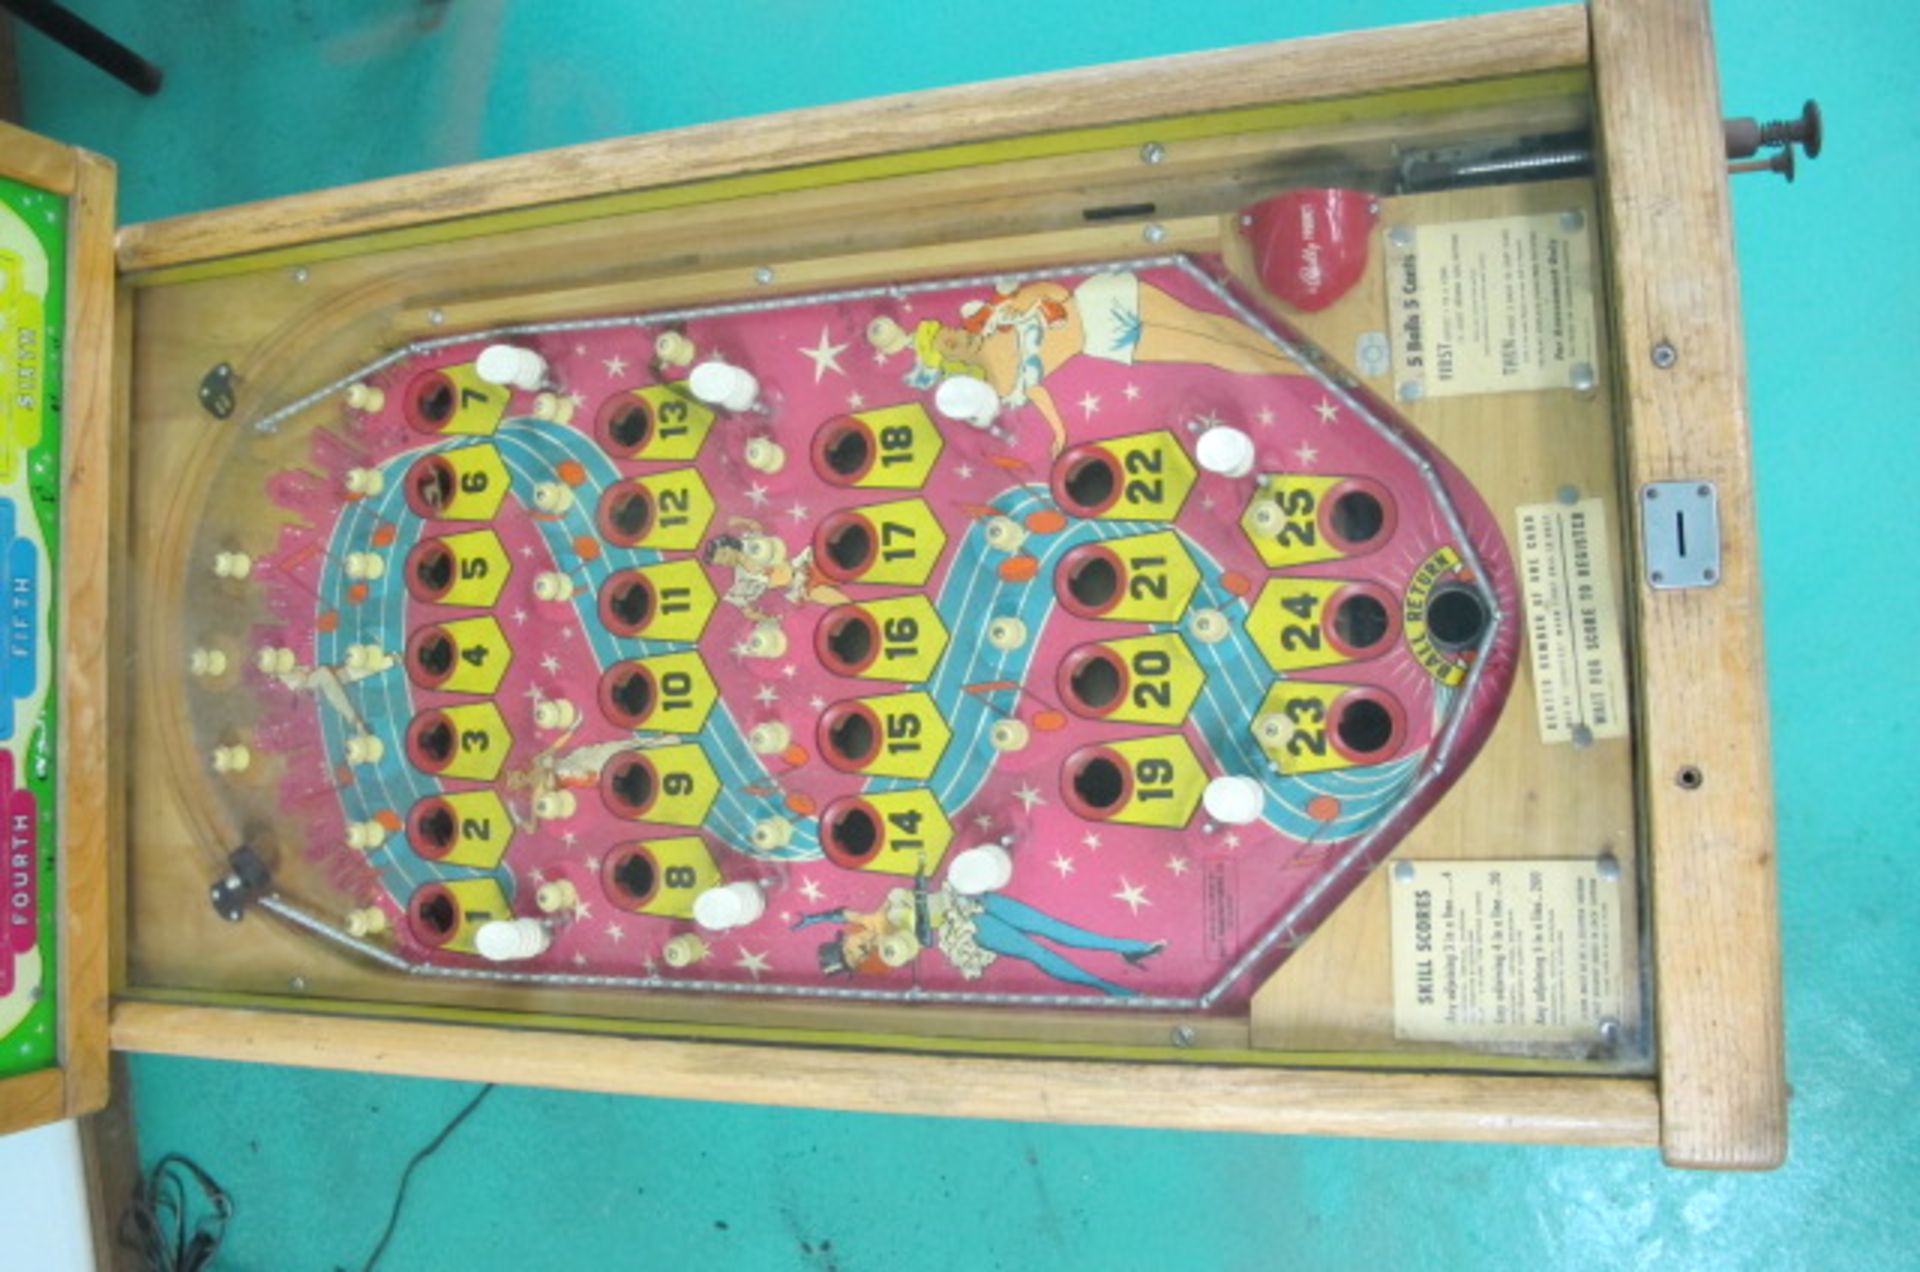 BALLY BRIGHT SPON PINBALL; 5BALL 5 CENTS 7472 OH 120, Lyons, Ohio 43523 - all Gaylord plastic - Image 5 of 5